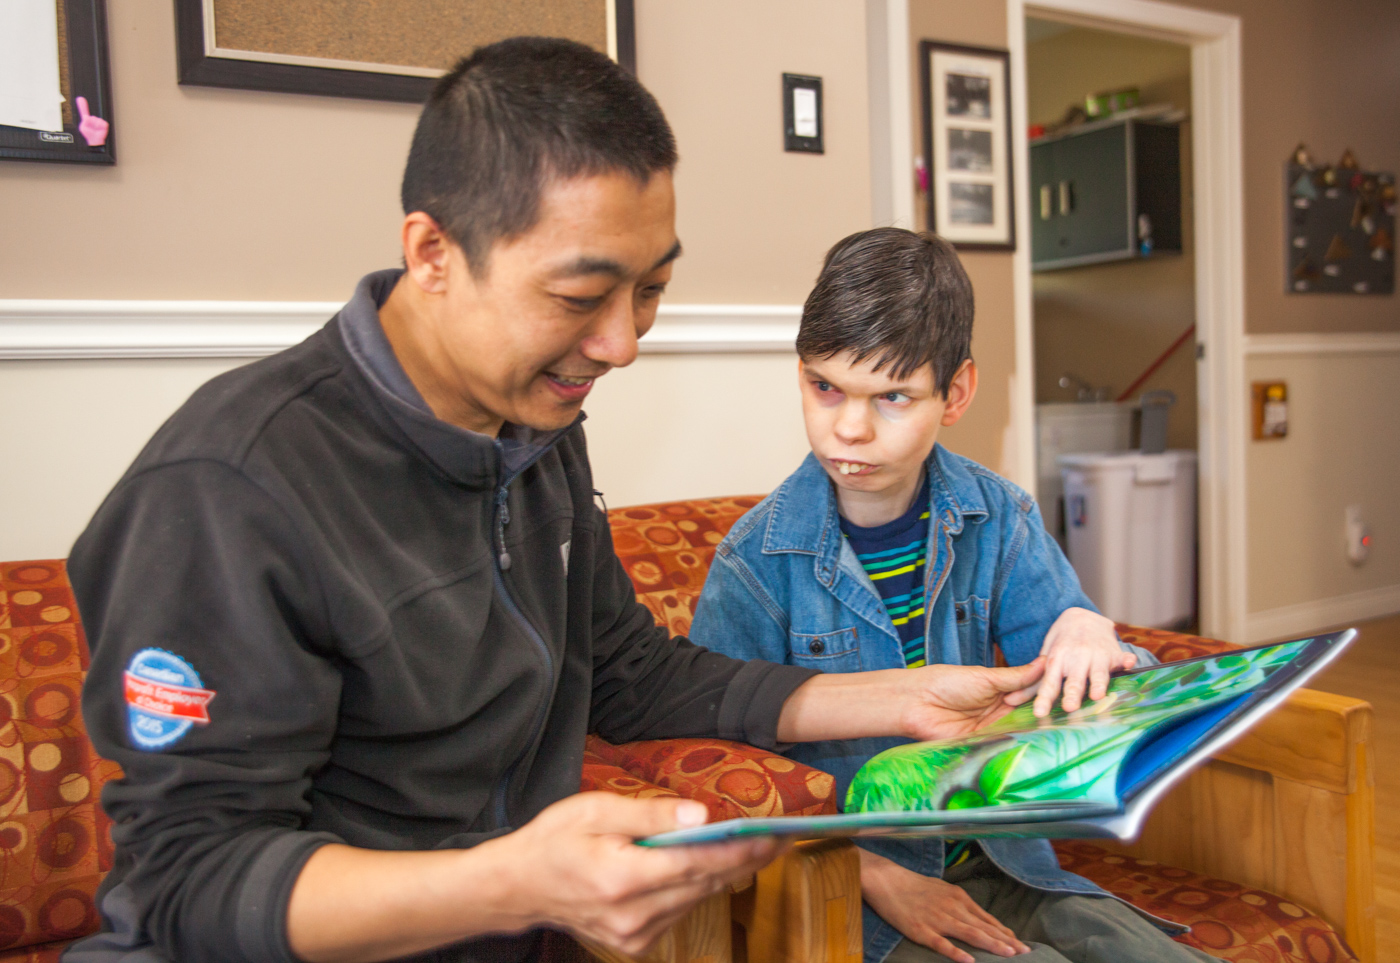 Intervenor and young man supported sit on a couch, reading a large book with pictures.